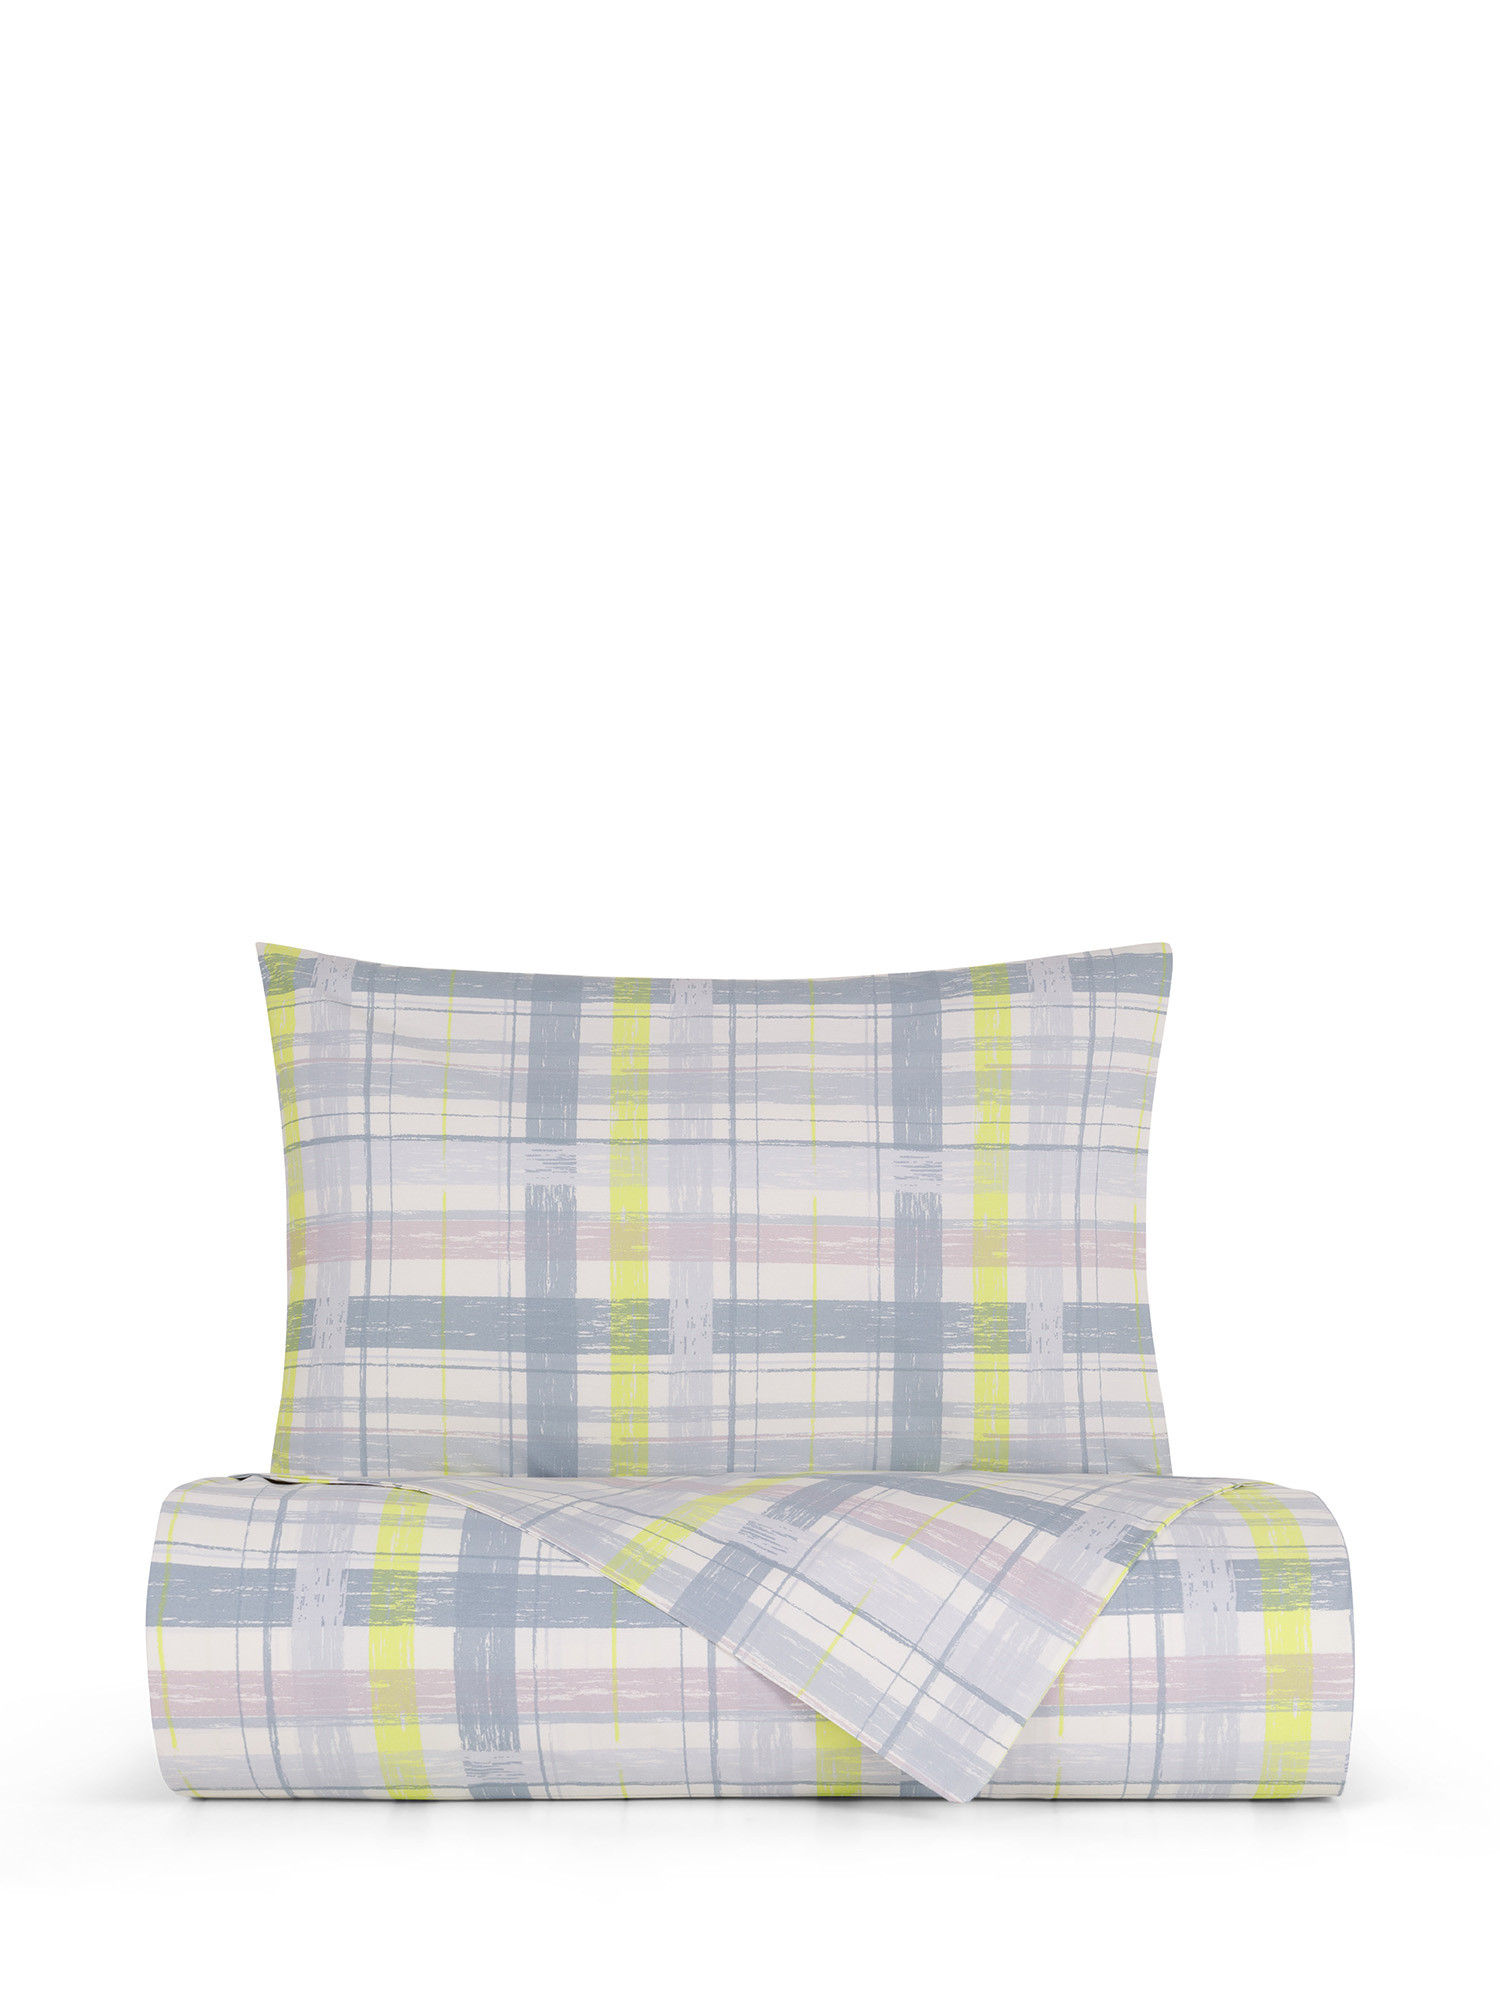 Cotton percale pillowcase with check print, Multicolor, large image number 1